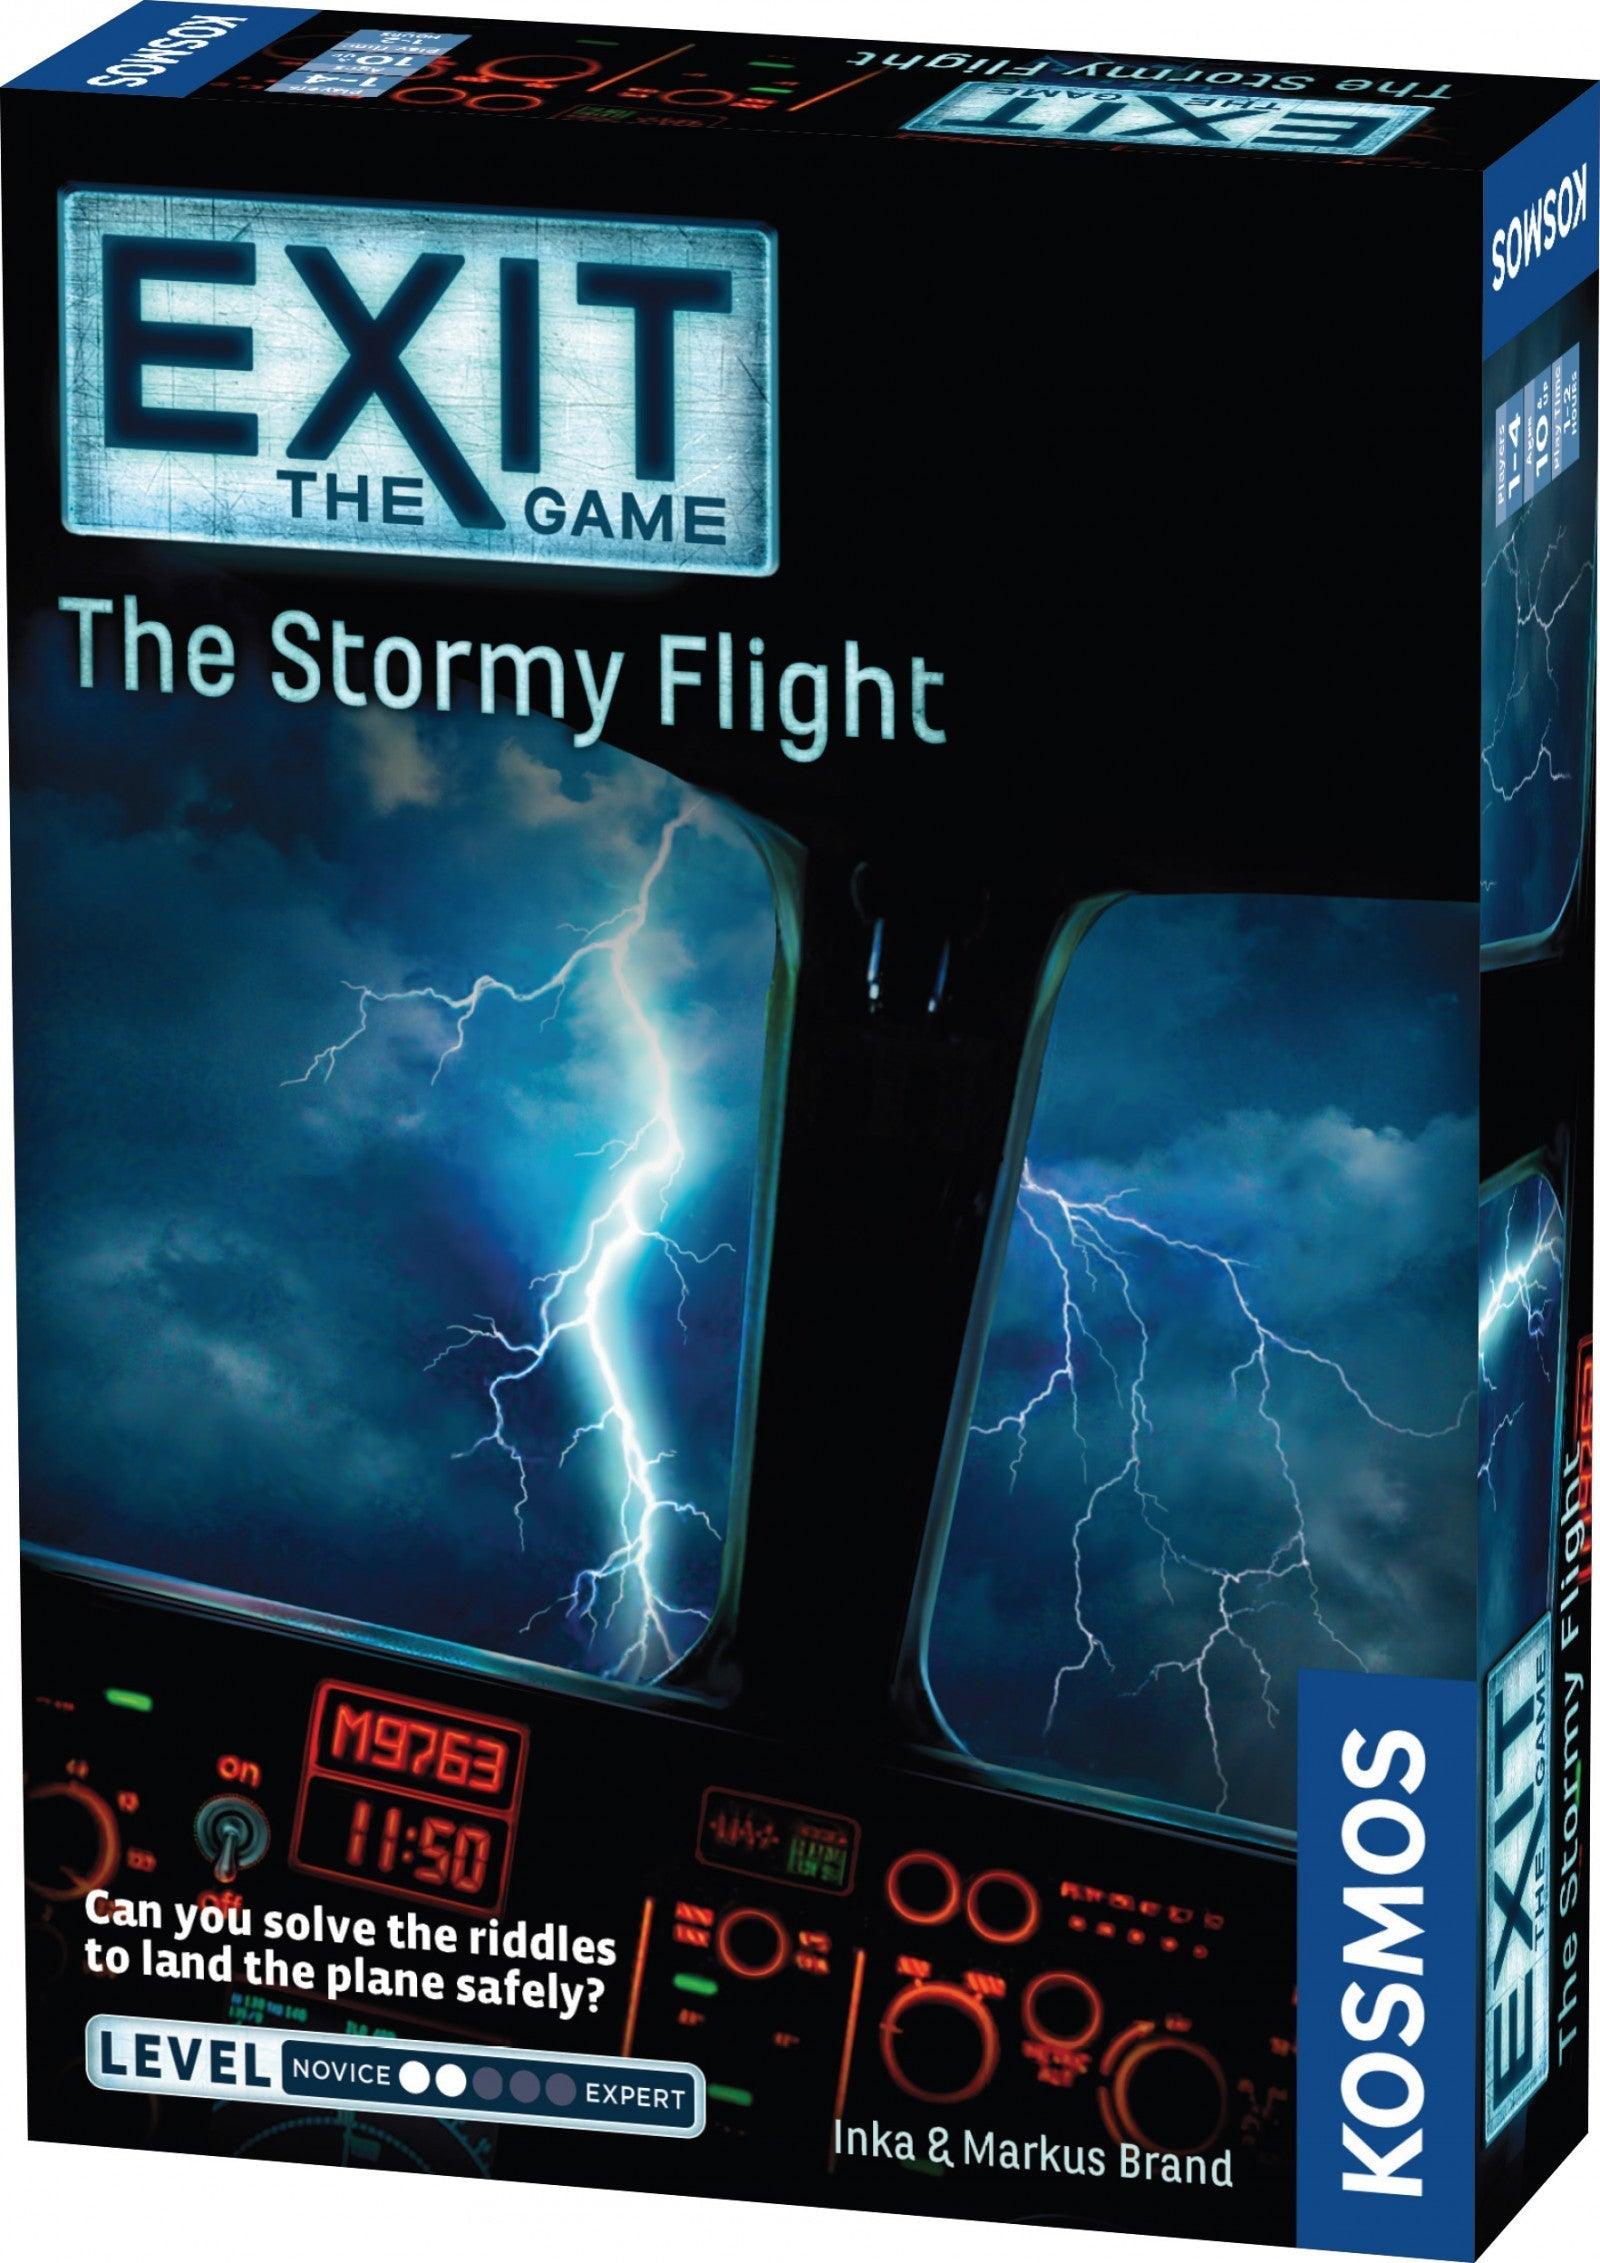 VR-77313 Exit the Game the Stormy Flight - Kosmos - Titan Pop Culture